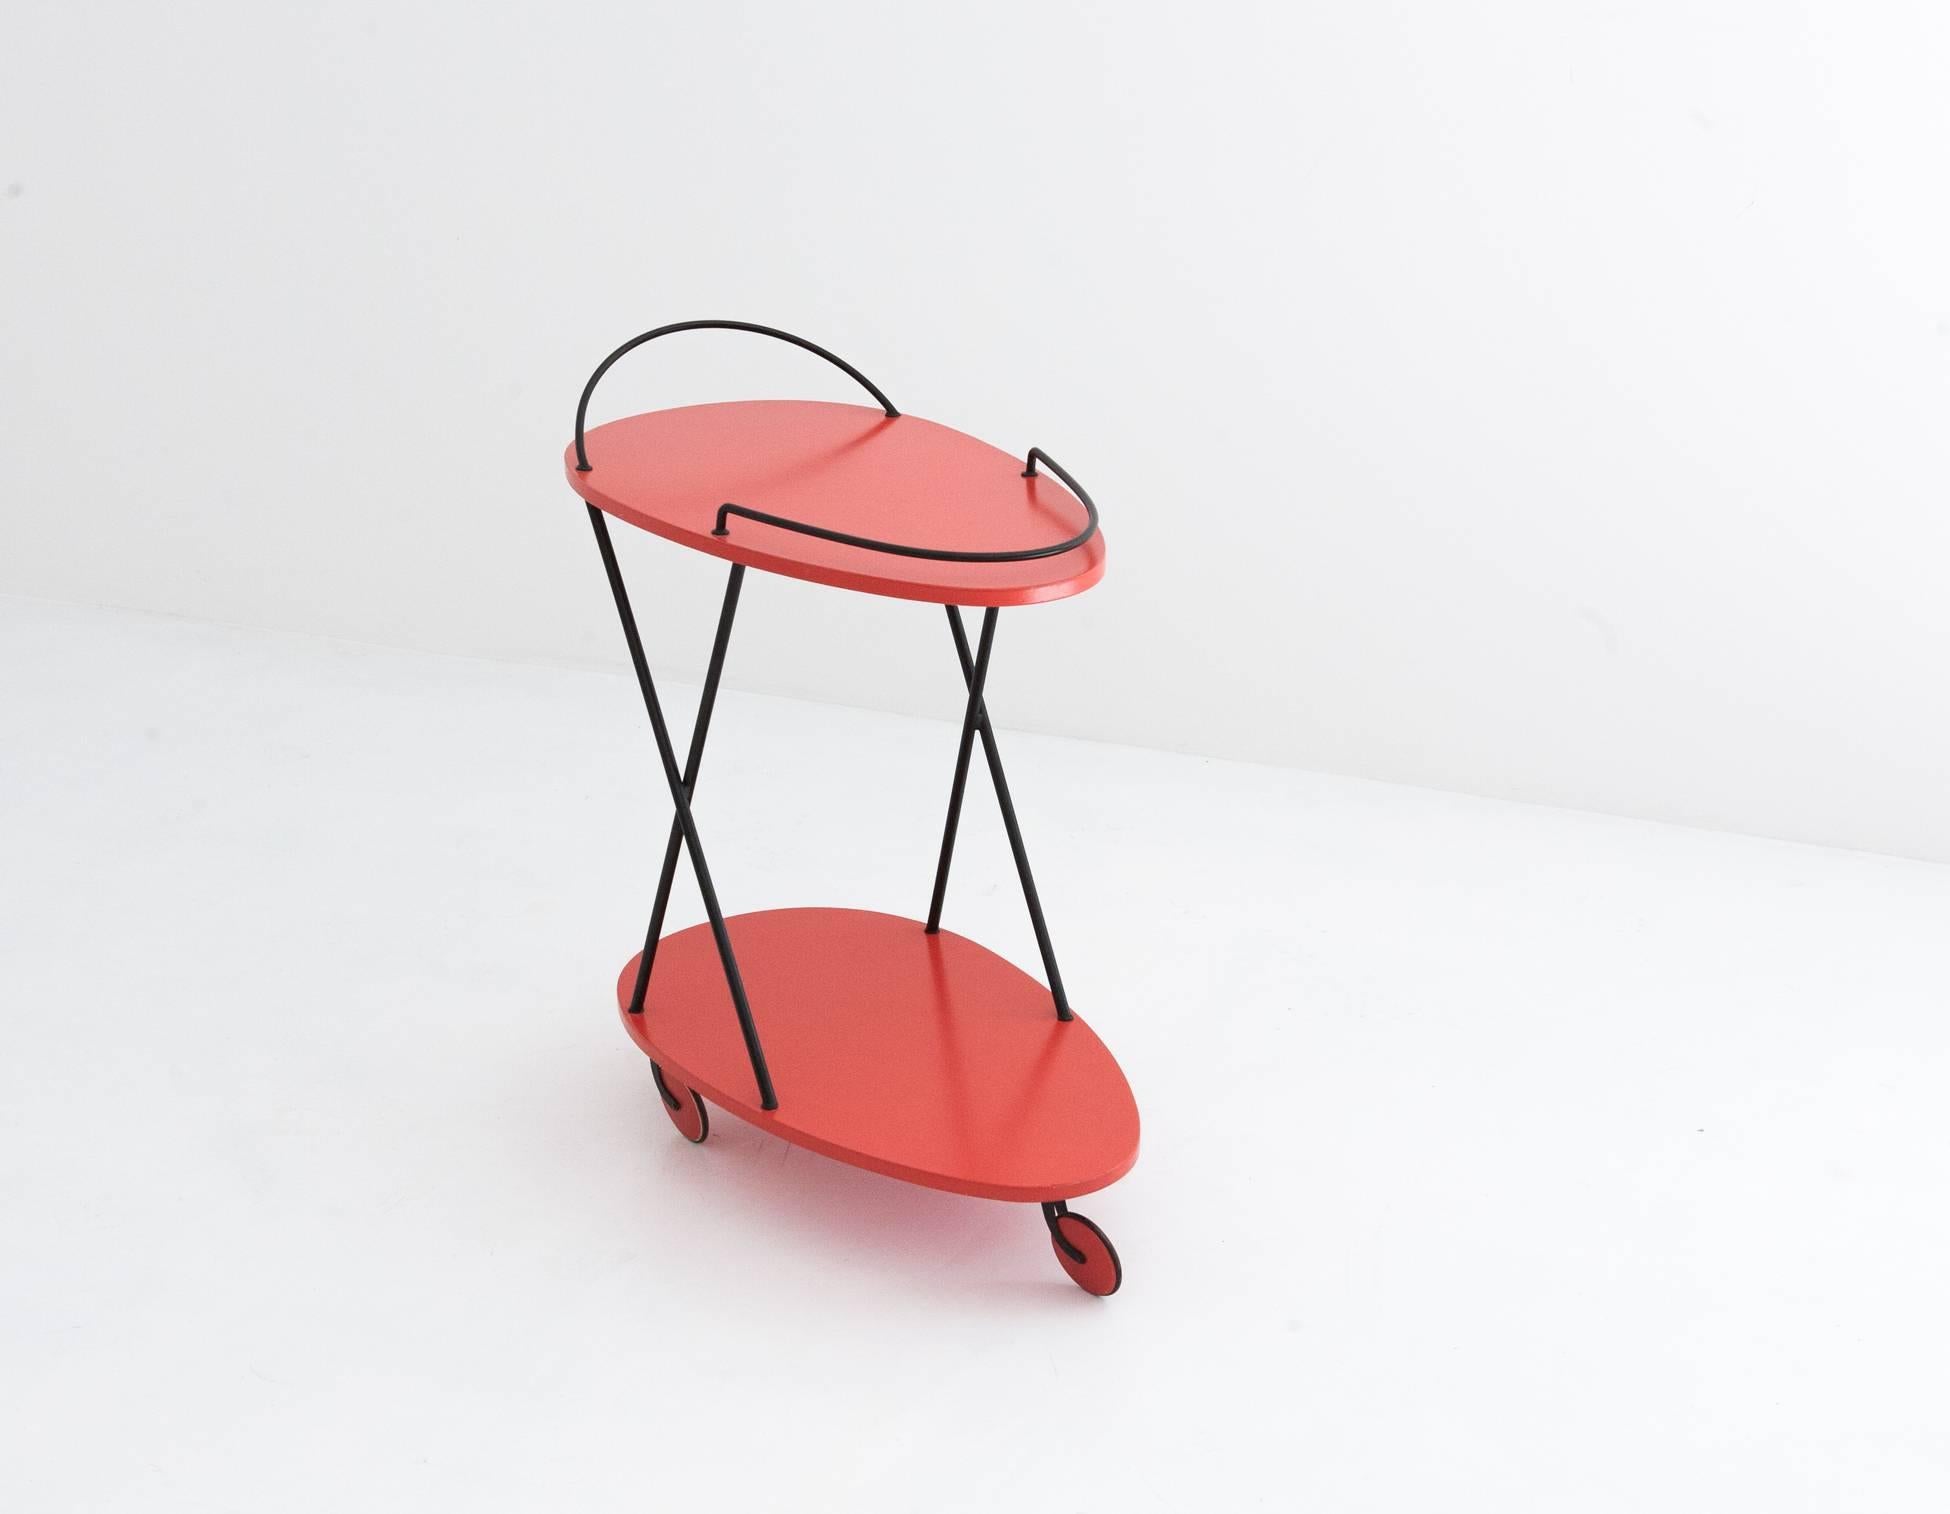 This rotating drinks trolley was designed in Italy during the 1960s. It is in a very good vintage condition.